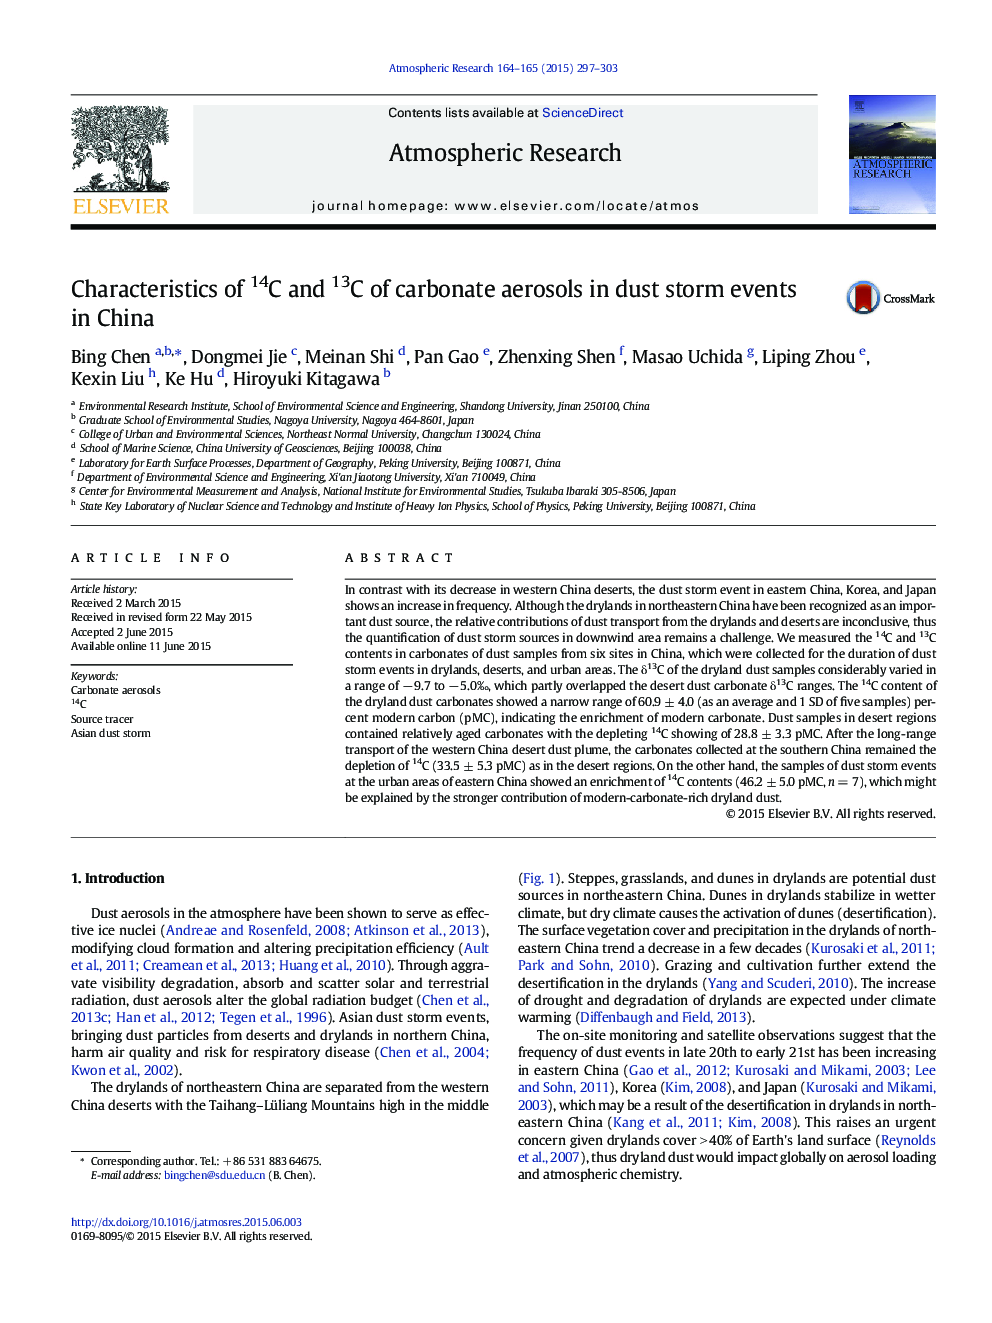 Characteristics of 14C and 13C of carbonate aerosols in dust storm events in China